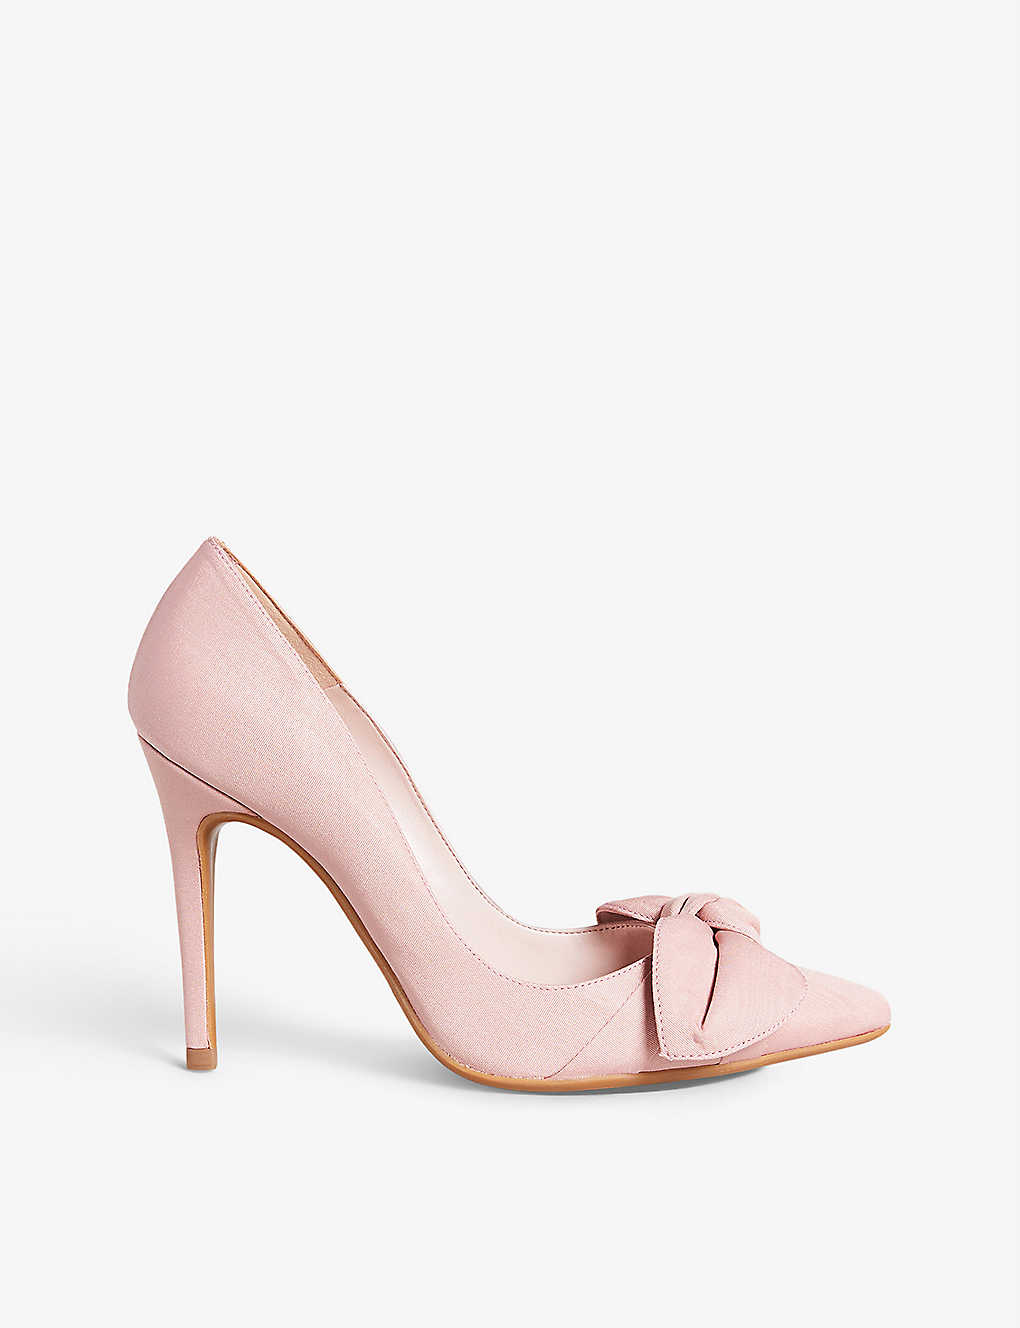 TED BAKER TED BAKER WOMENS PINK HYANA BOW-EMBELLISHED POINTED-TOE COTTON-BLEND COURTS,54826947